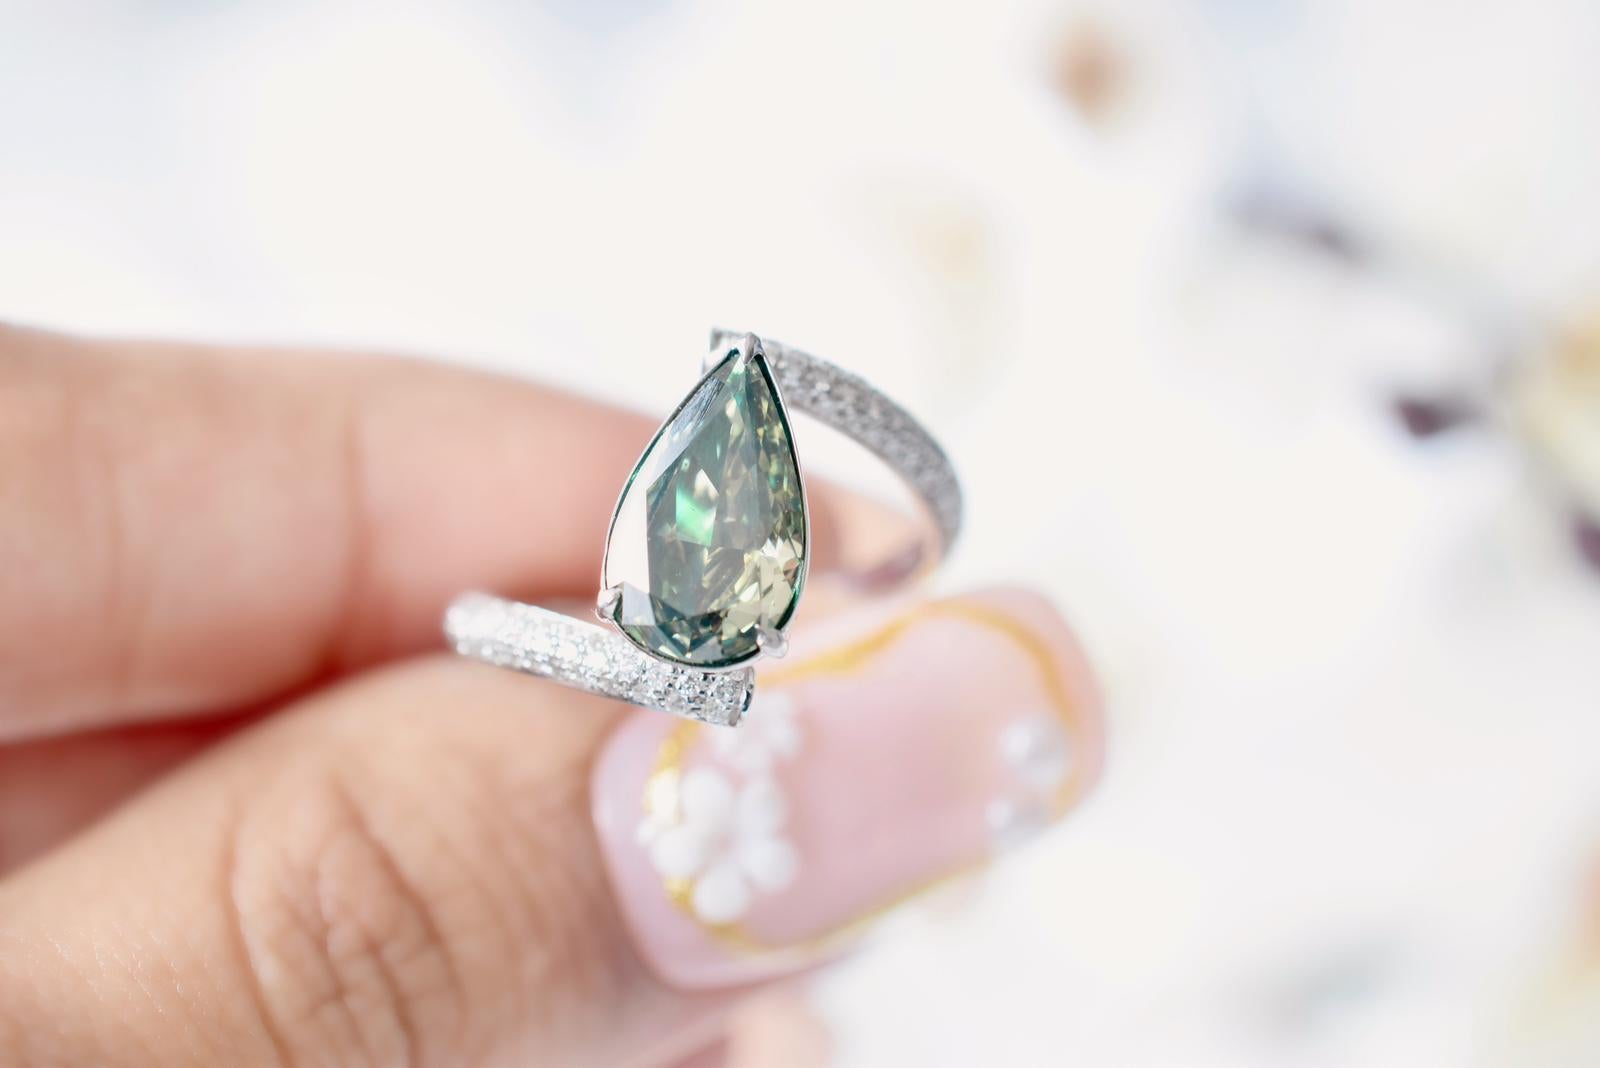 **100% NATURAL FANCY COLOUR DIAMOND JEWELLERY**

✪ Jewellery Details ✪

♦ MAIN STONE DETAILS

➛ Stone Shape: Pear
➛ Stone Color: Fancy Dark Gray Yellowish Green
➛ Stone Weight: 2.17 carats
➛ GIA certified

♦ SIDE STONE DETAILS

➛ Side white diamonds